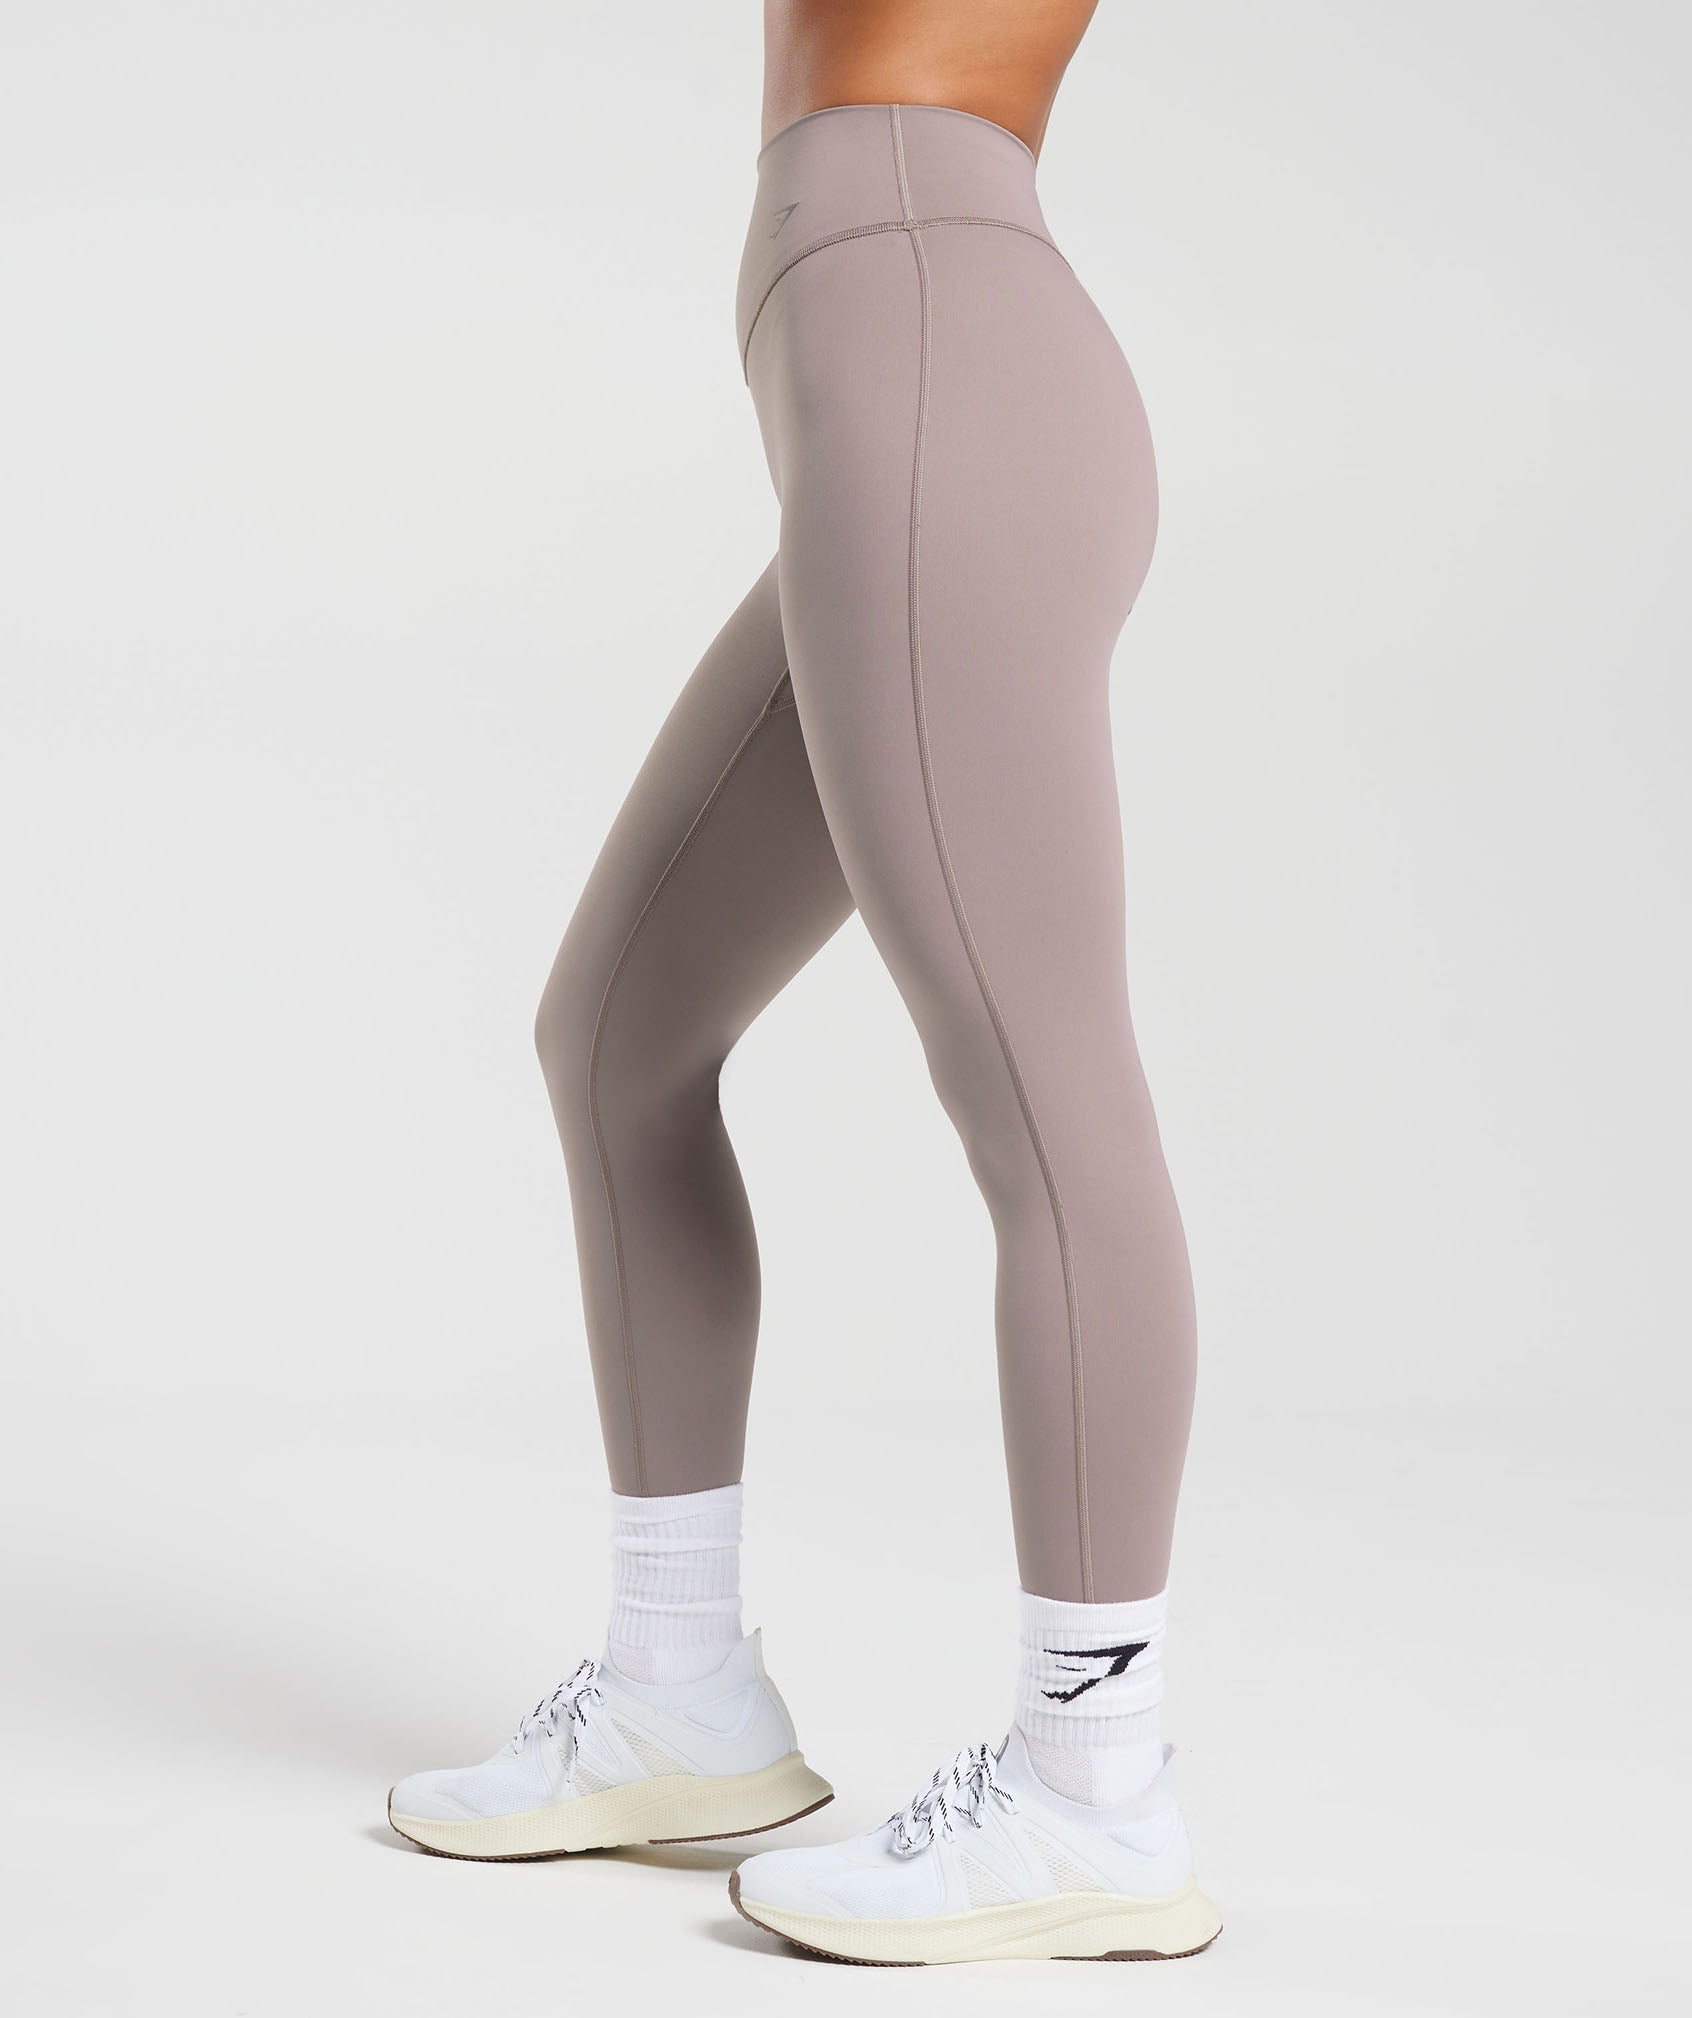 Elevate Leggings in Washed Mauve - view 3